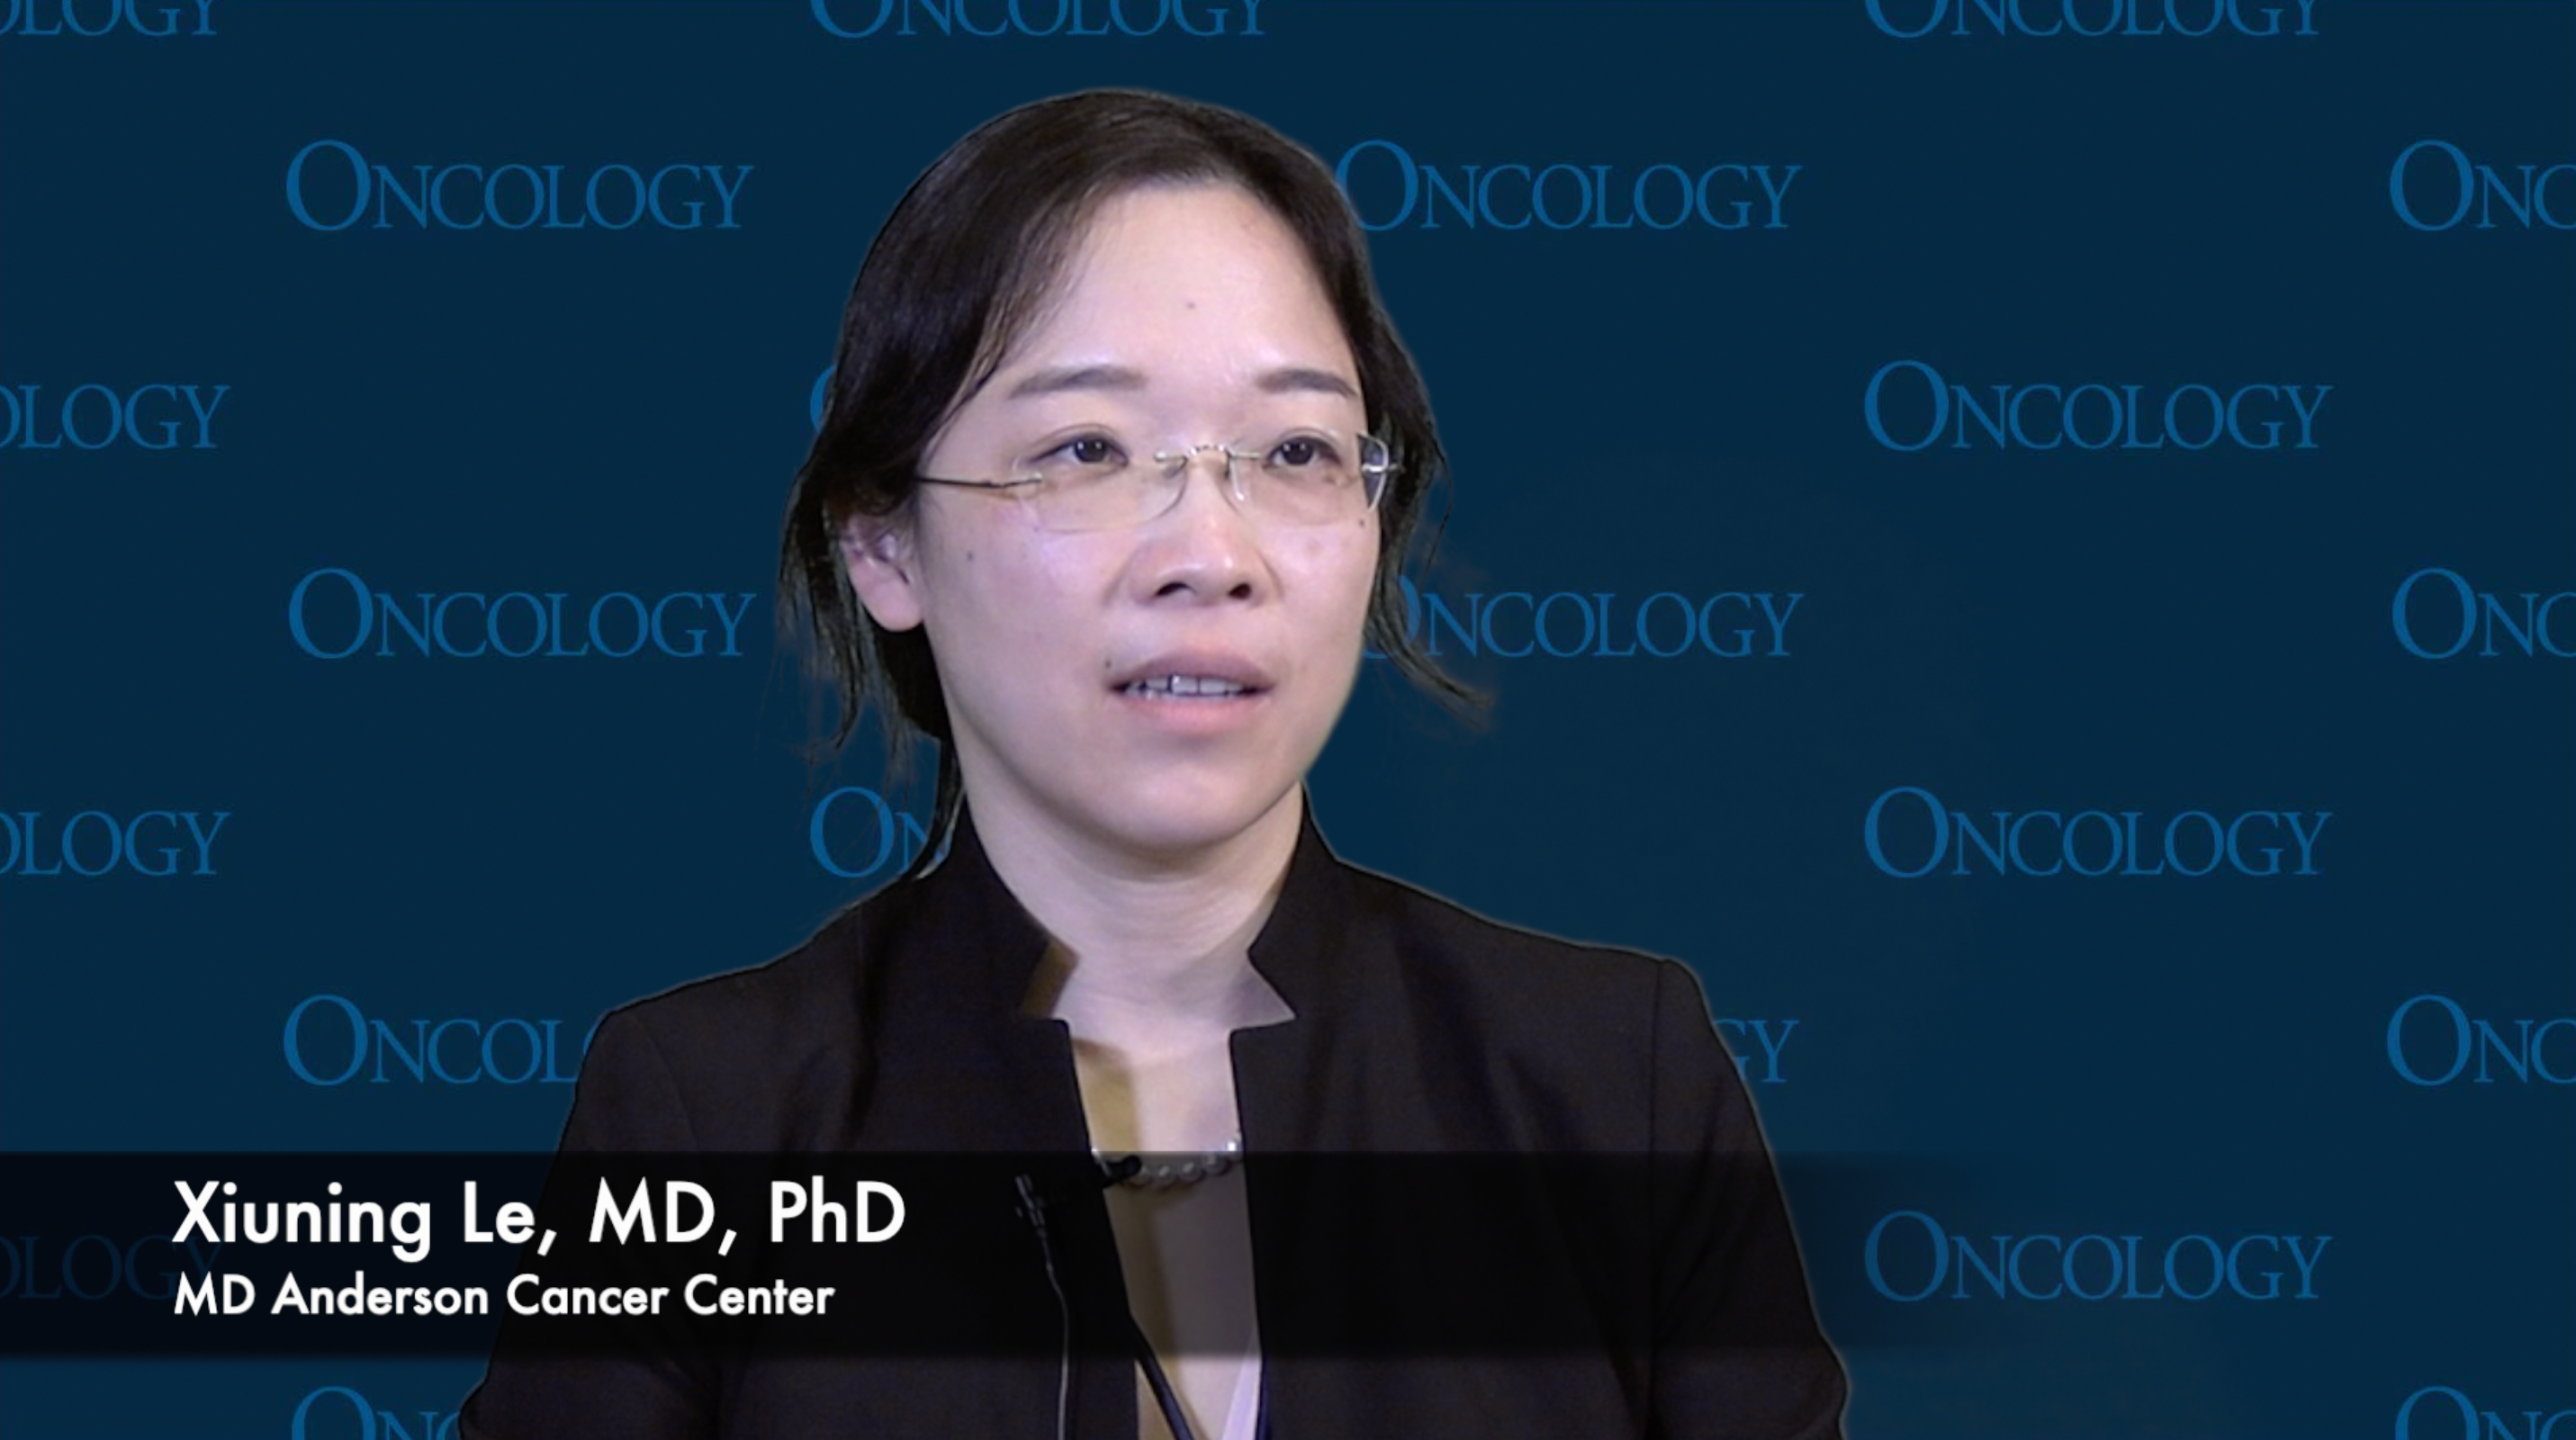 Xiuning Le, MD, PhD, Discusses Key Efficacy Data With Tepotinib in Advanced NSCLC  